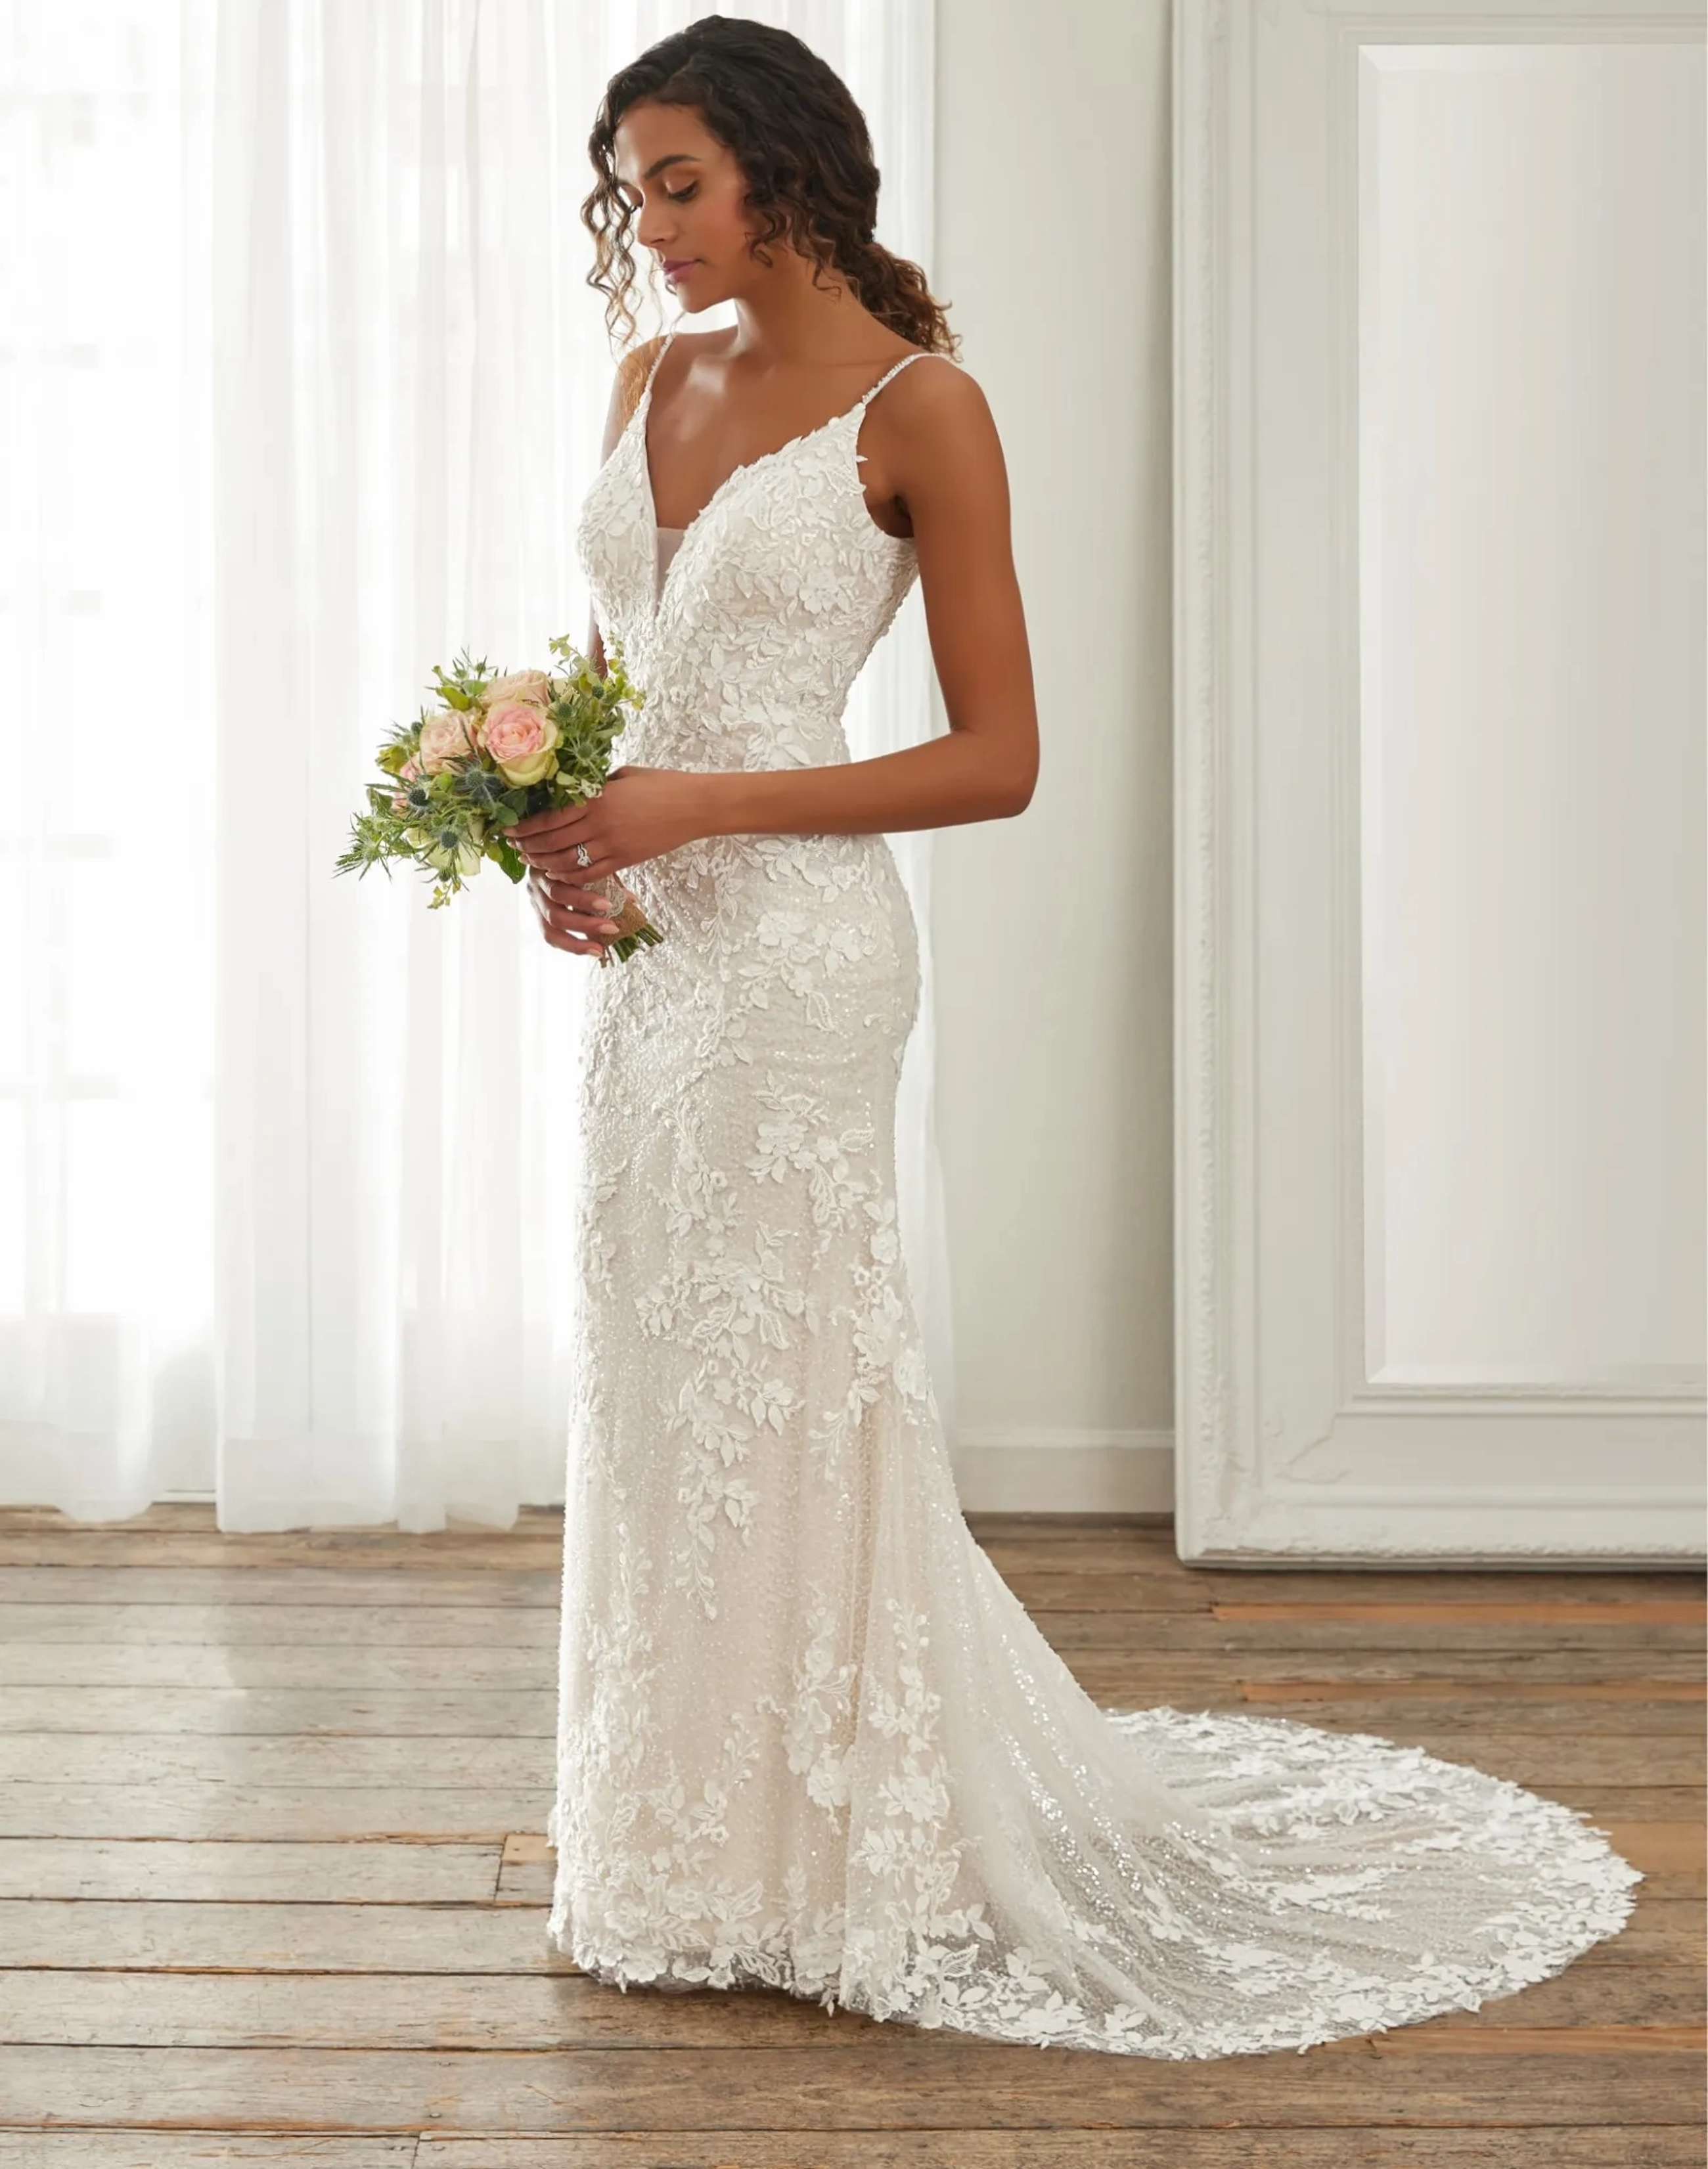 Bridal Boutique Etiquette: The Dos &amp; Don’ts of Wedding Dress Shopping Image